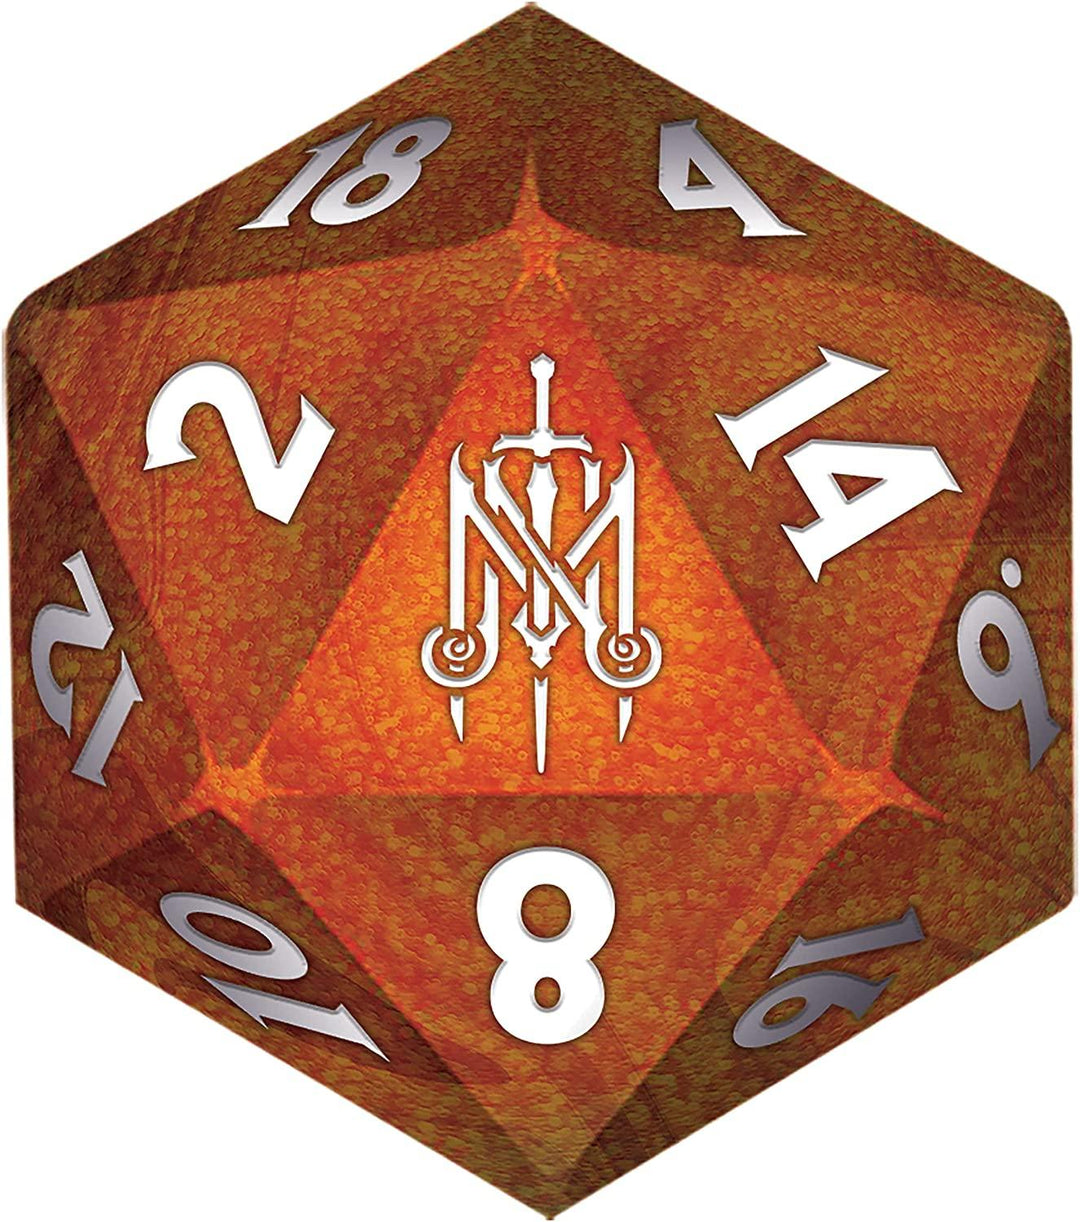 Critical Role D20 Mighty Nein 20 Sided Die - Mini Megastore